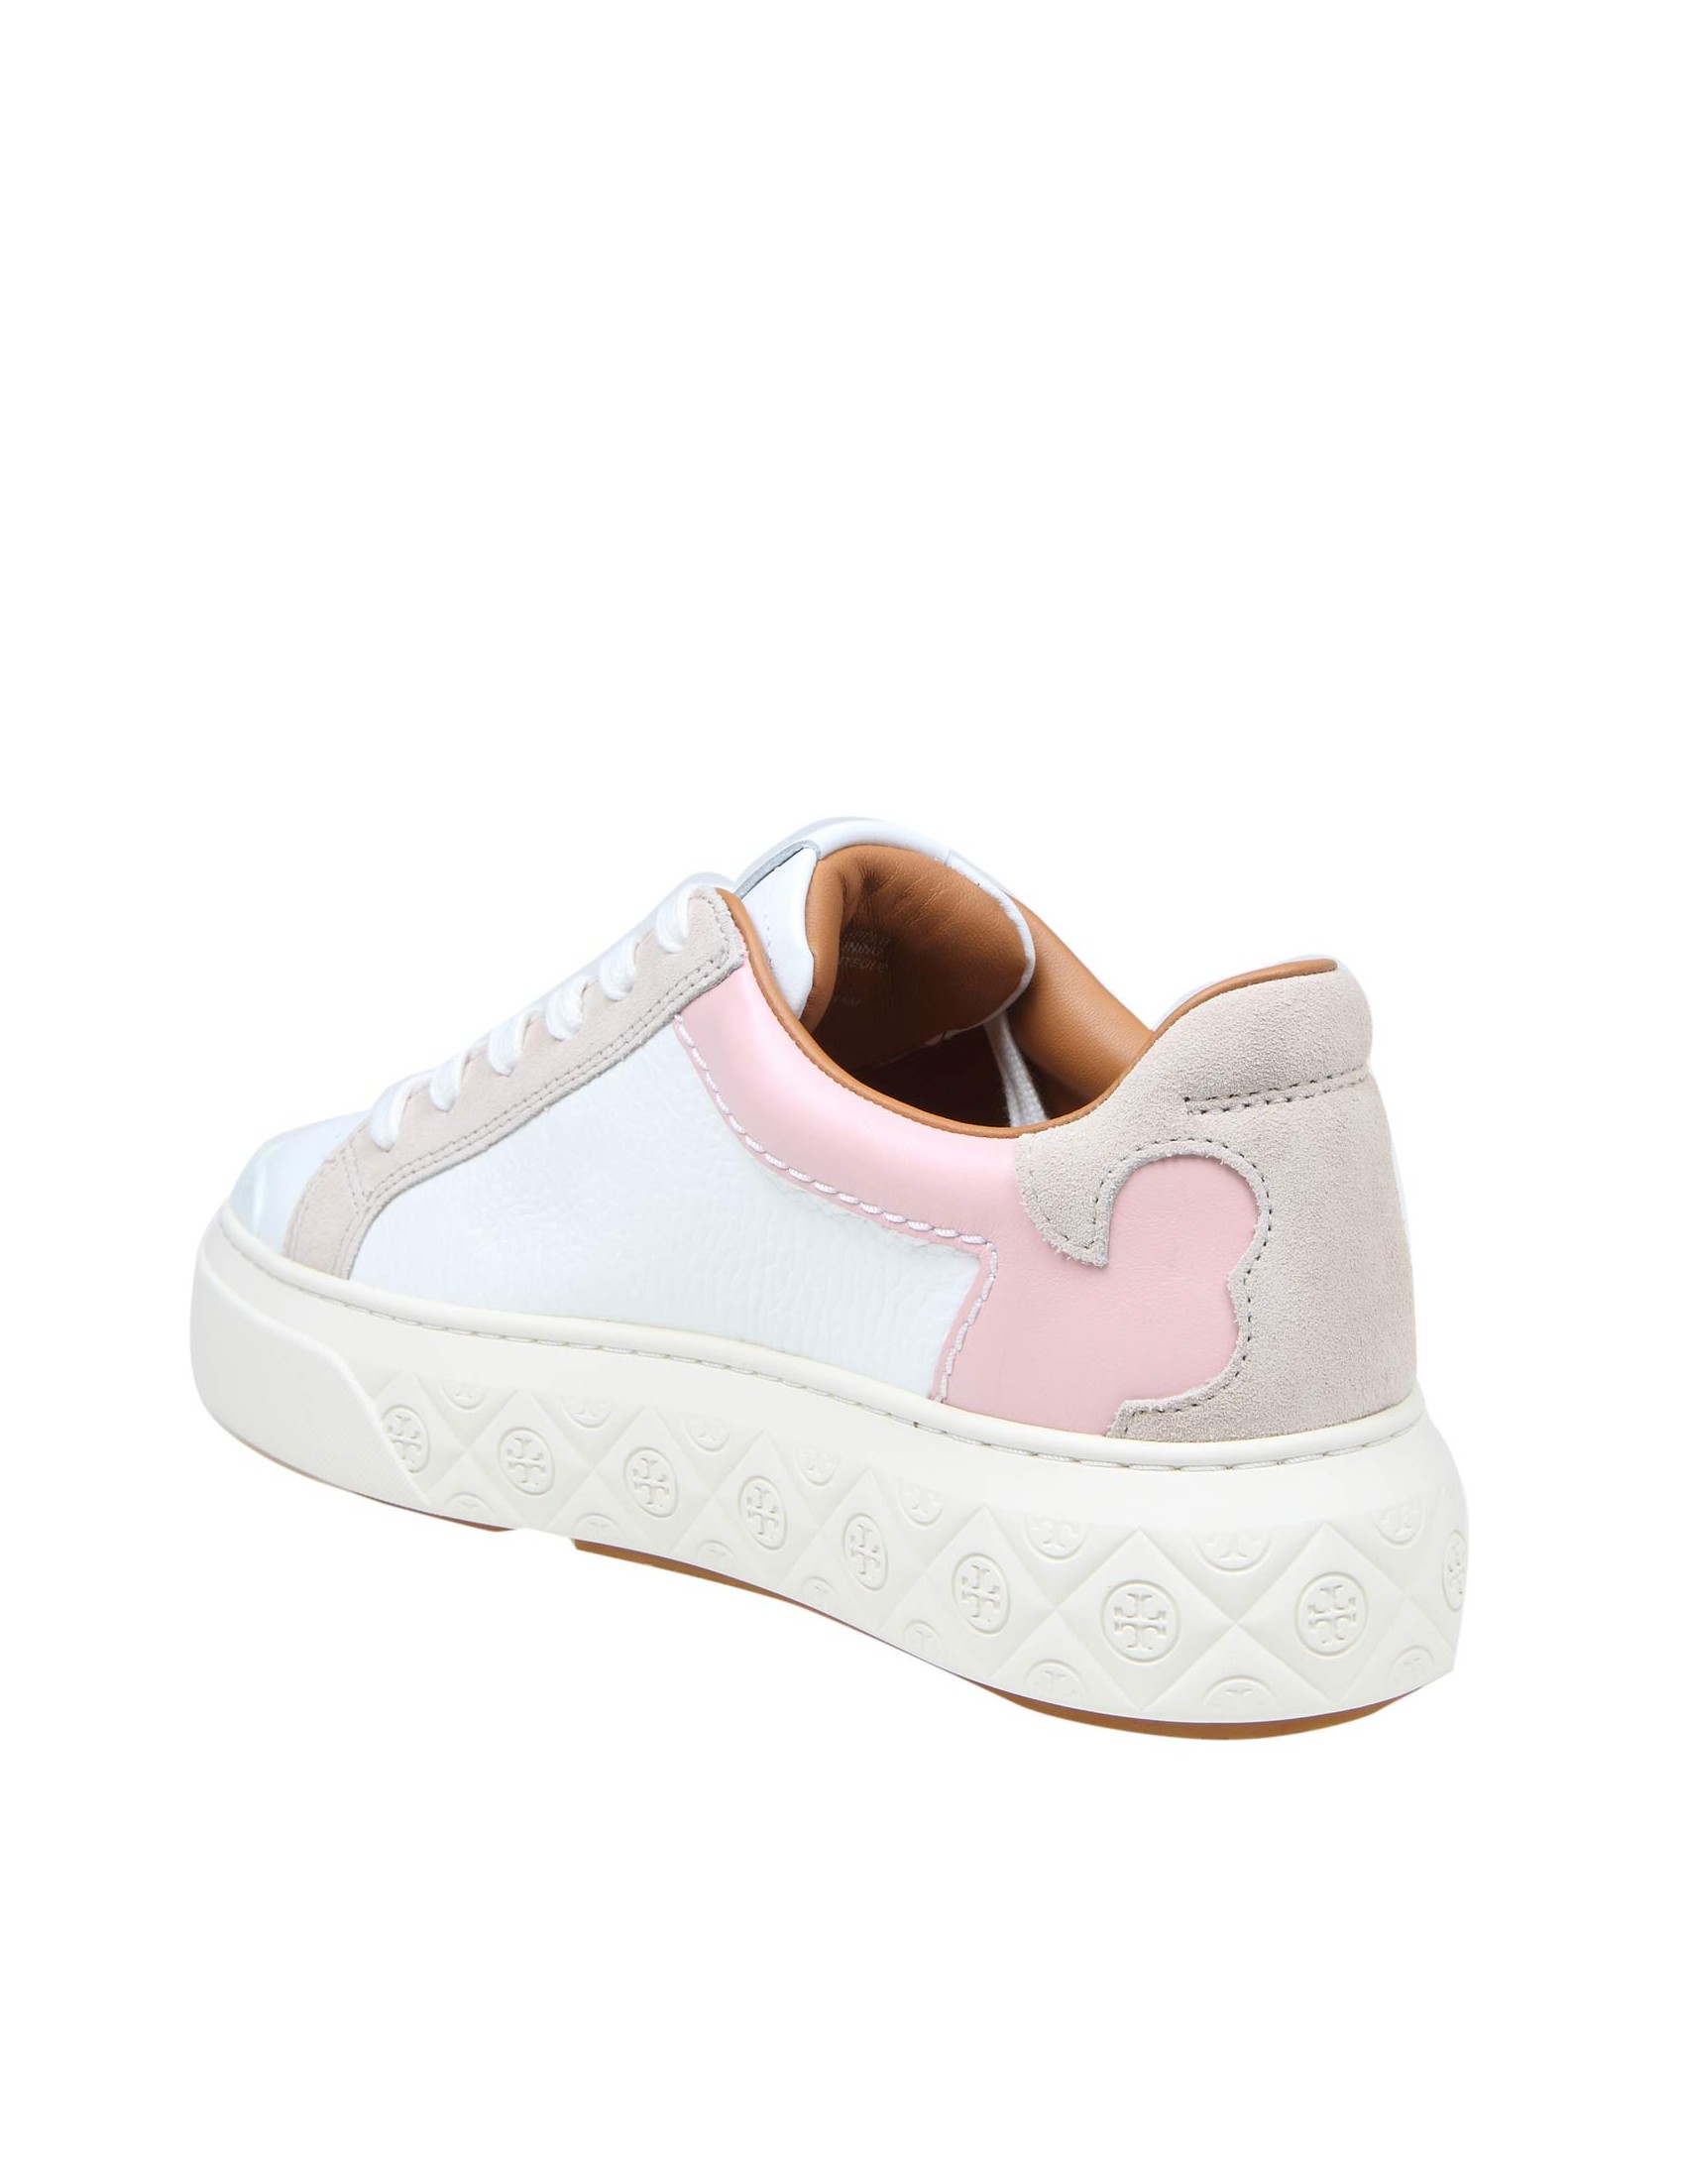 TORY BURCH LADYBUG SNEAKERS IN WHITE AND PINK LEATHER